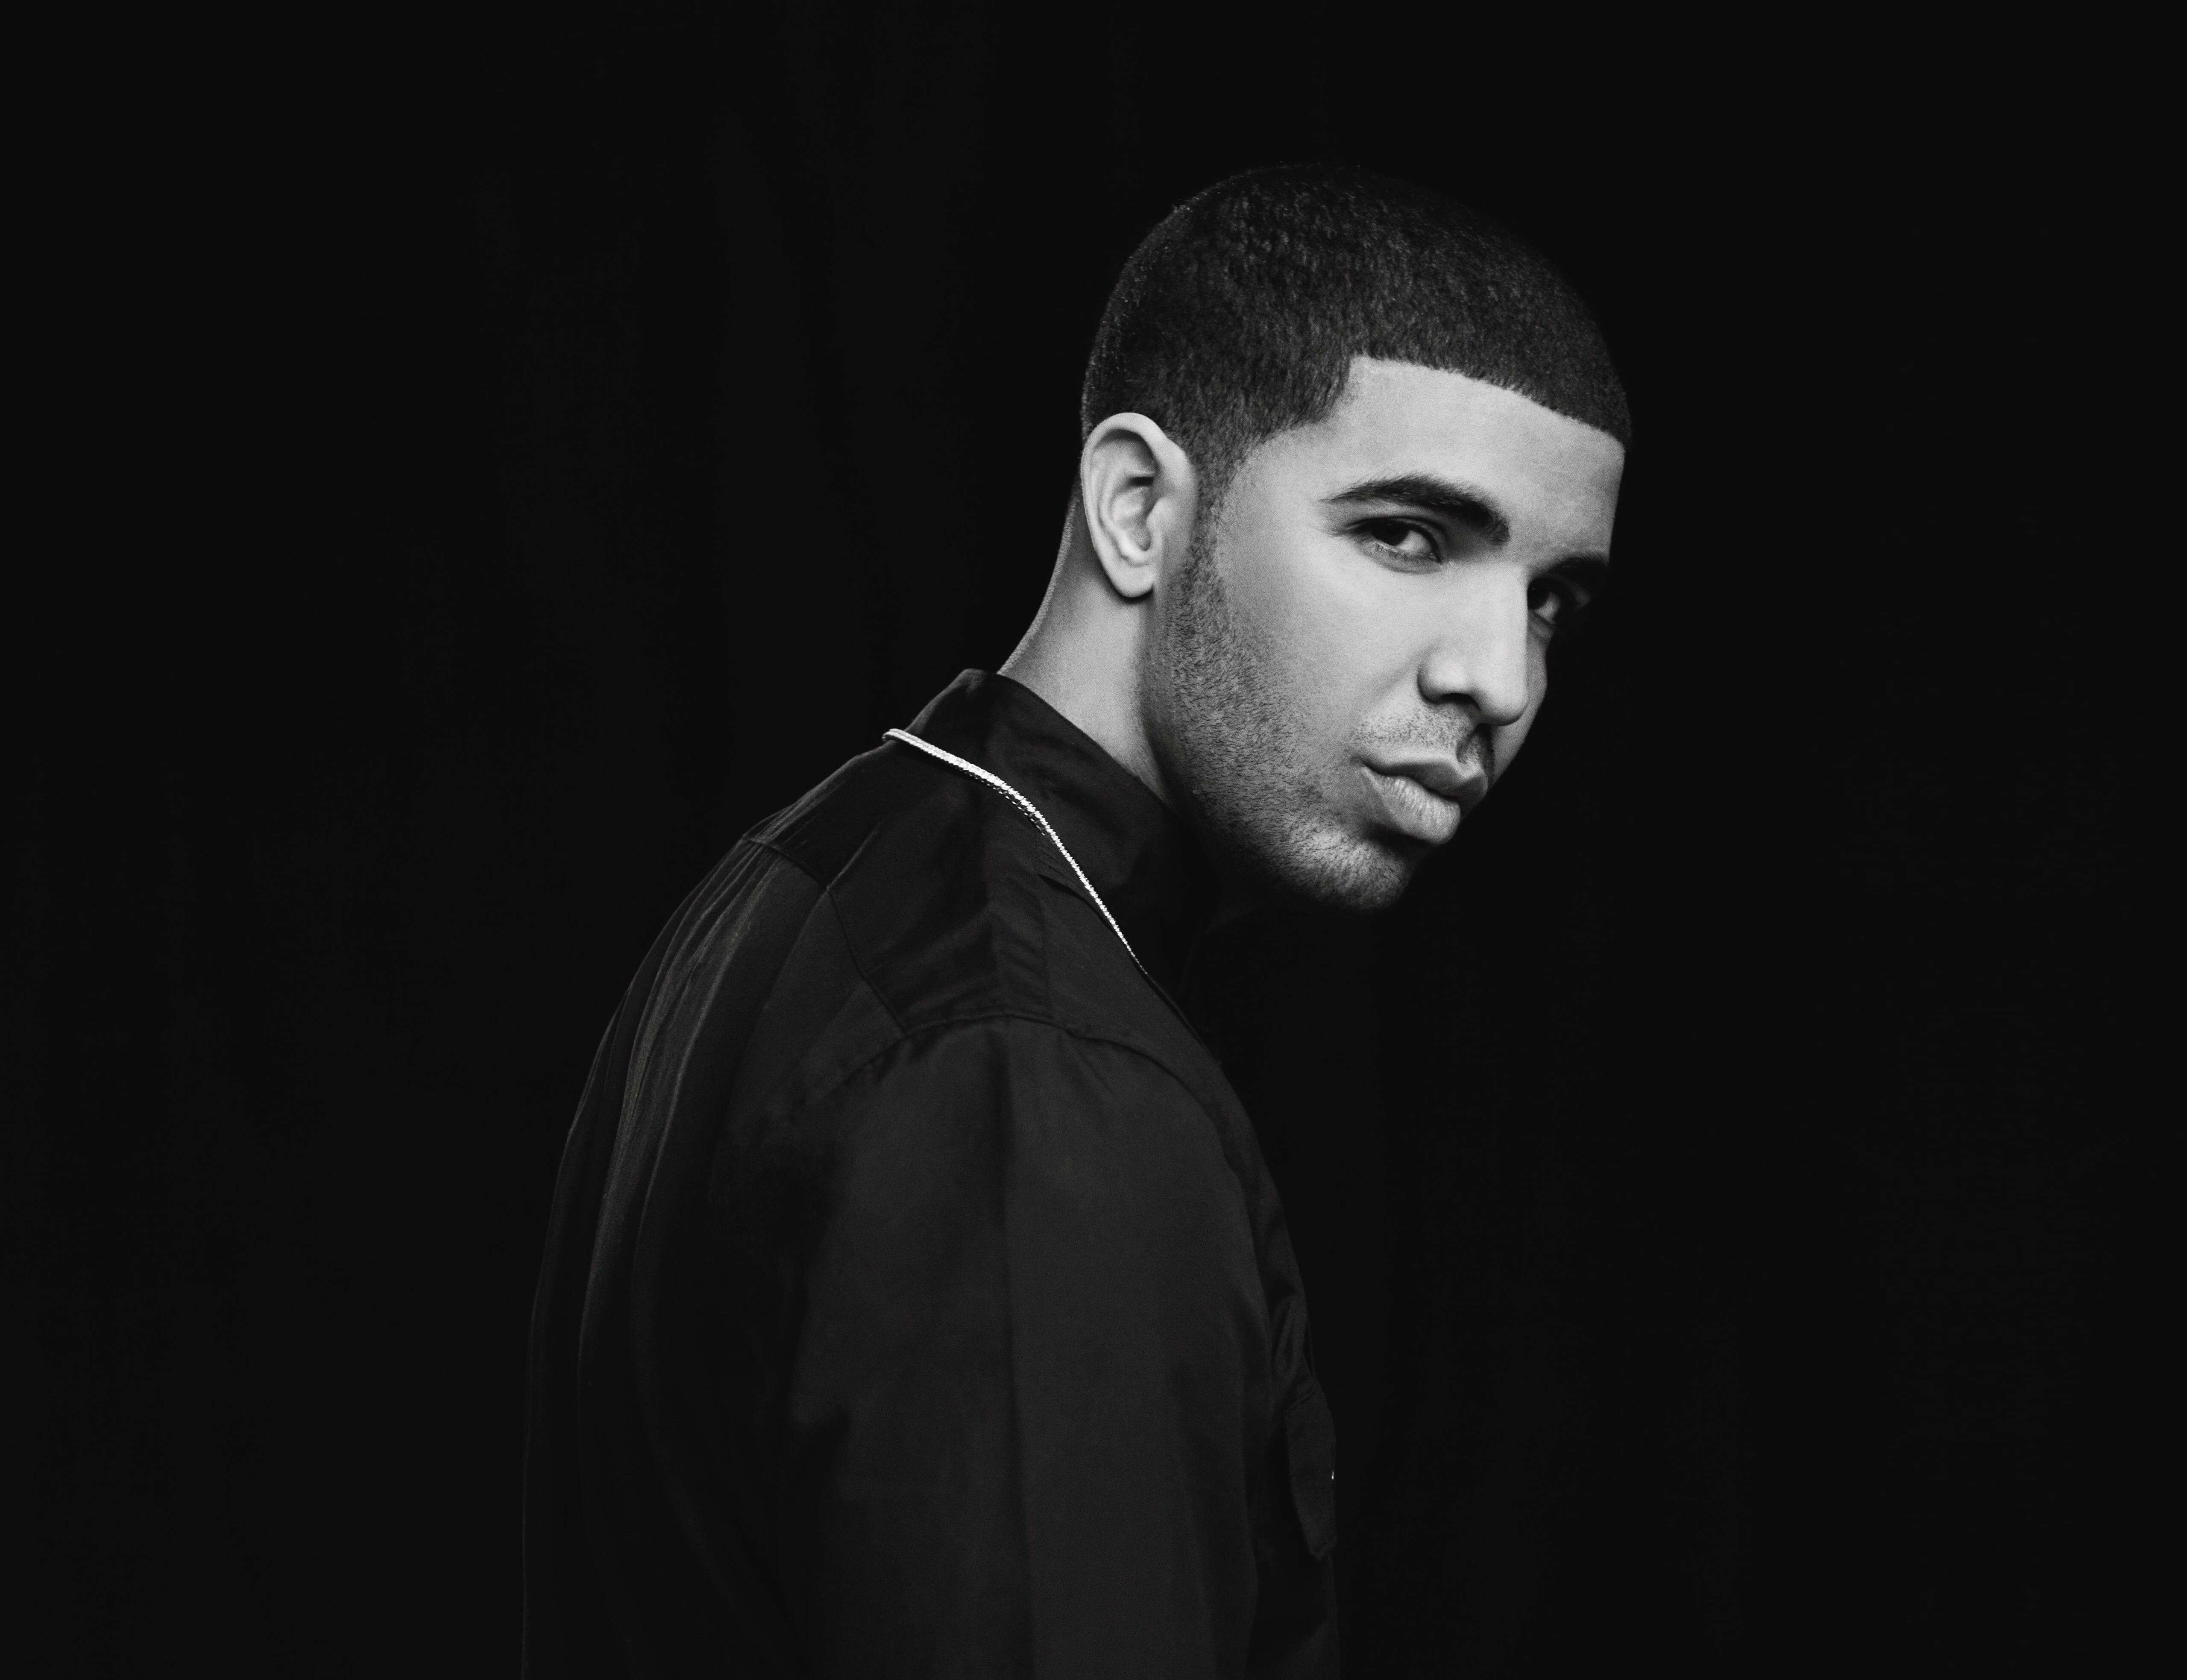 Drake Rapper Wallpaper: HD, 4K, 5K for PC and Mobile. Download free image for iPhone, Android